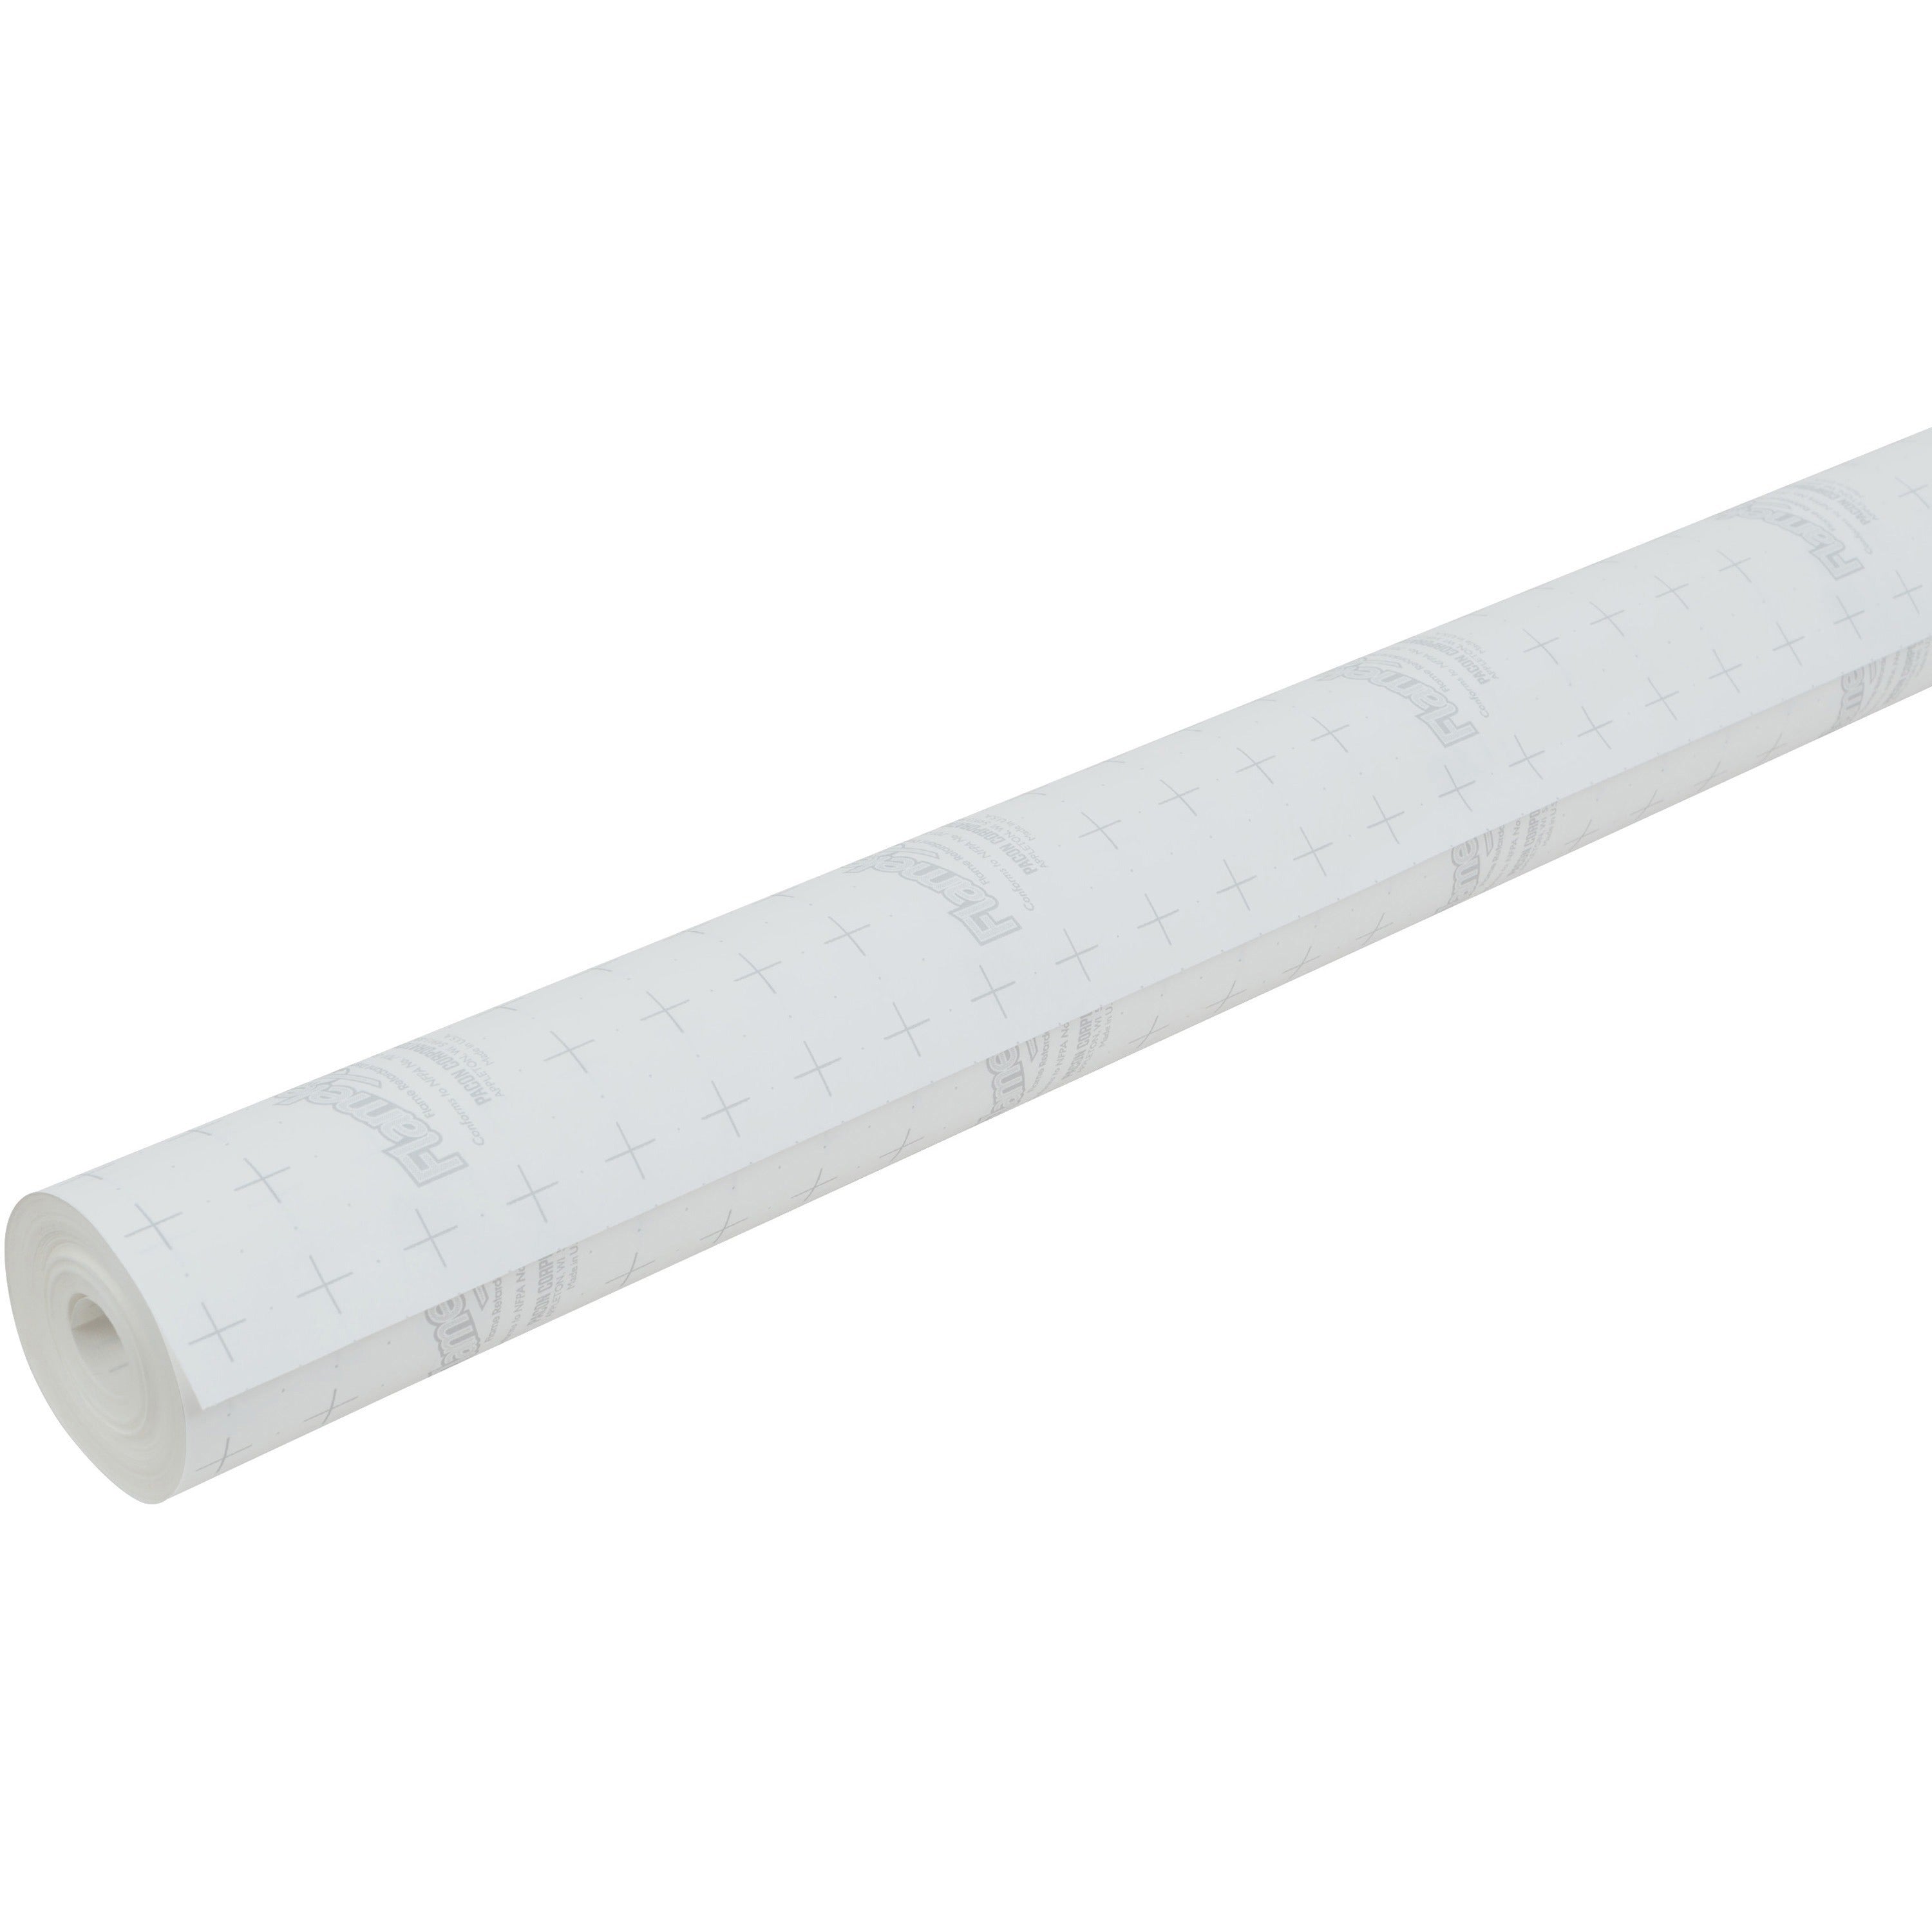 flameless-flame-retardant-paper-classroom-office-mural-banner-bulletin-board-48width-x-100-ftlength-1-roll-frost-white_pacp0052041 - 1